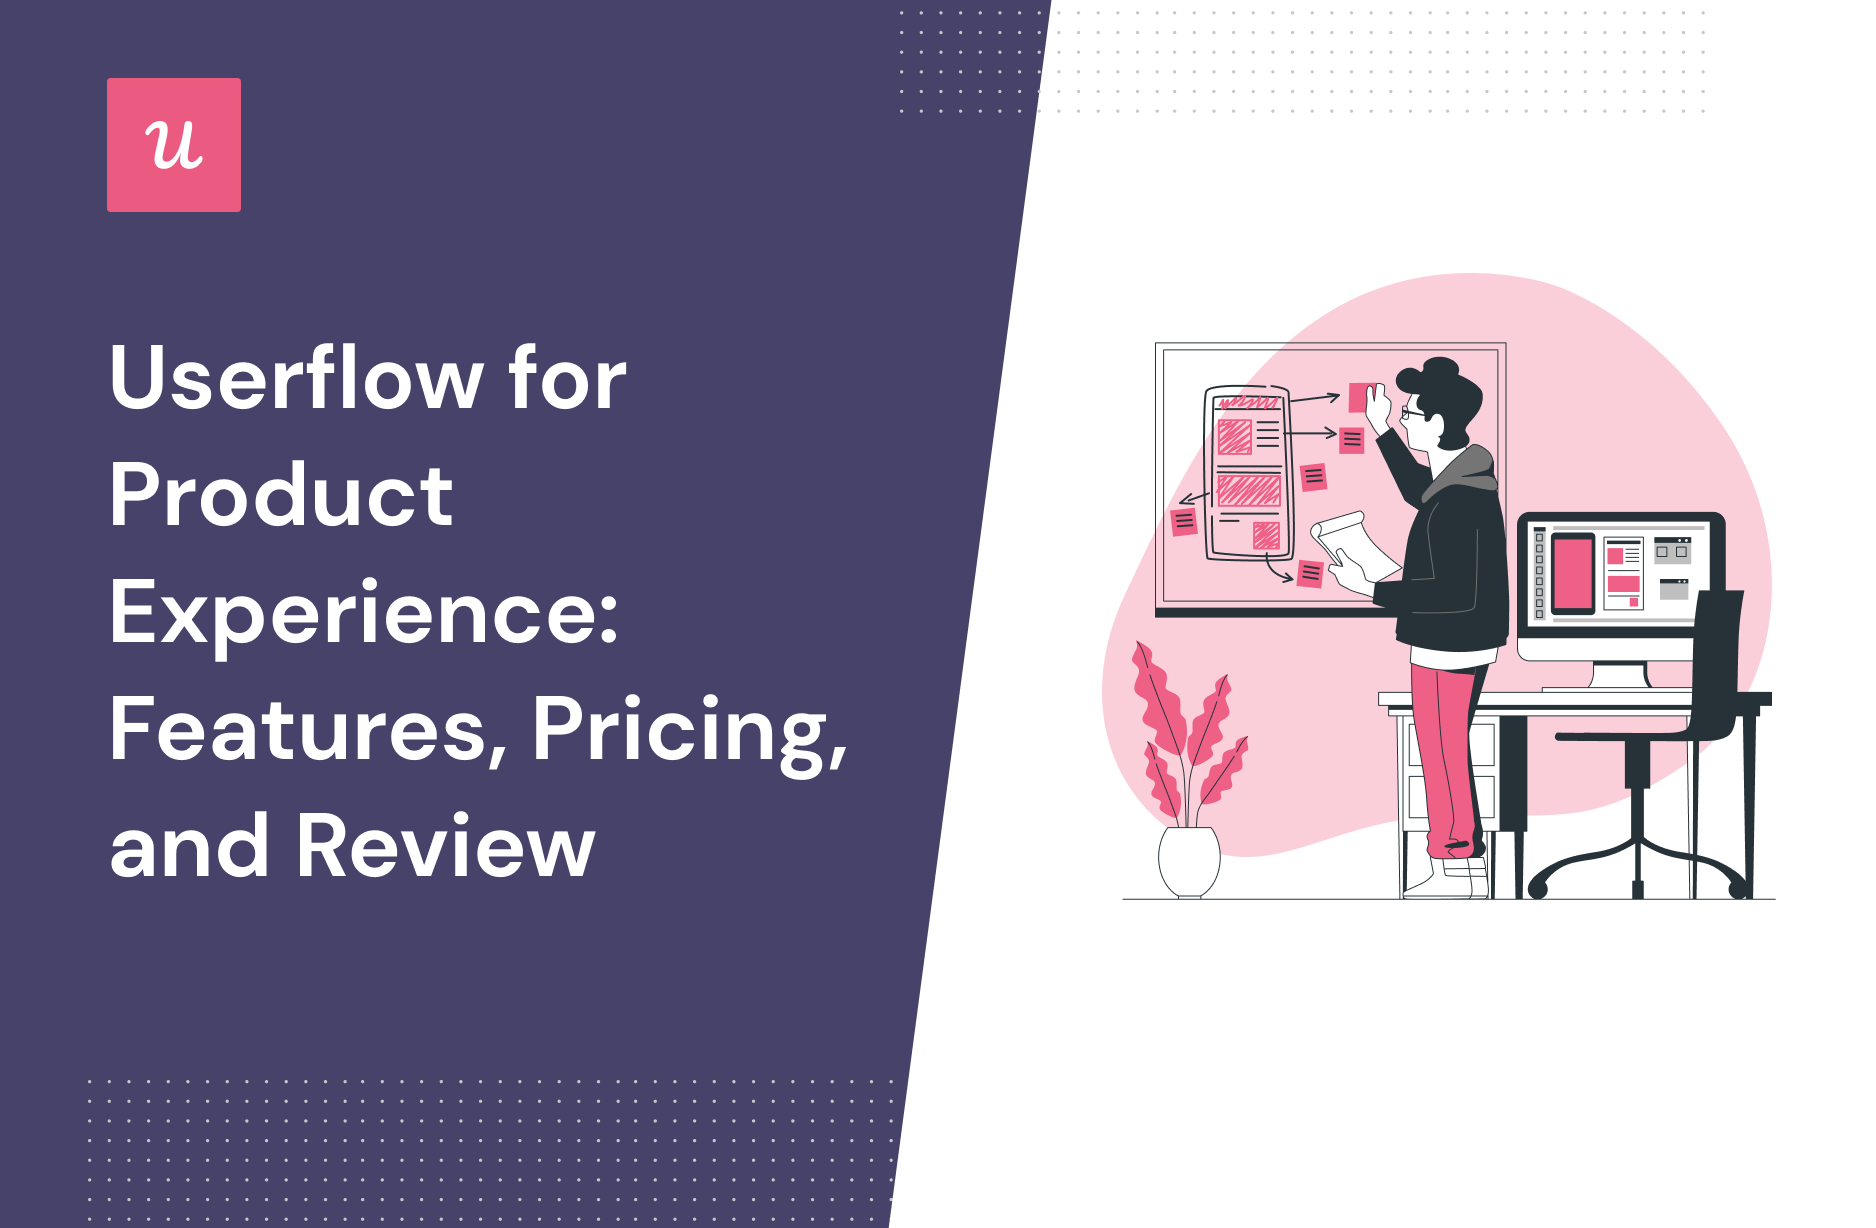 Userflow for Product Experience: Features, Pricing, and Review